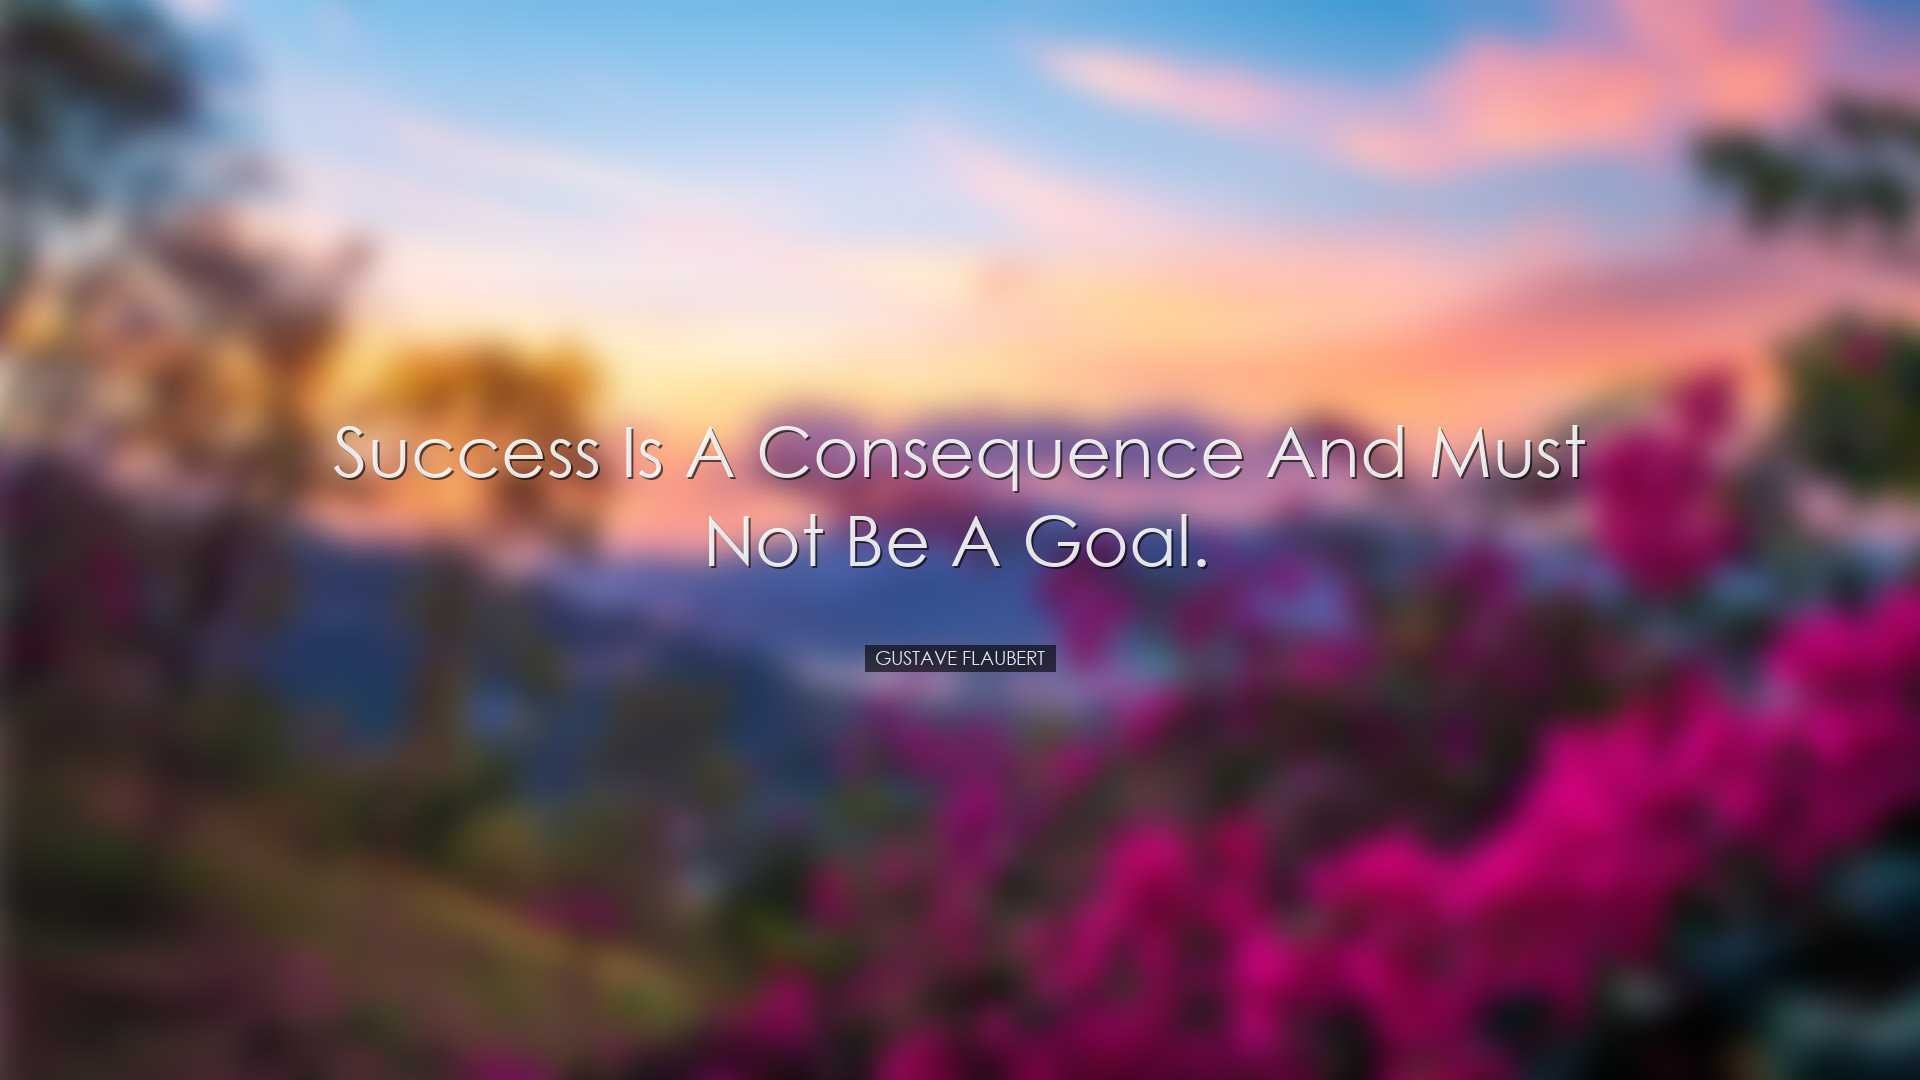 Success is a consequence and must not be a goal. - Gustave Flauber